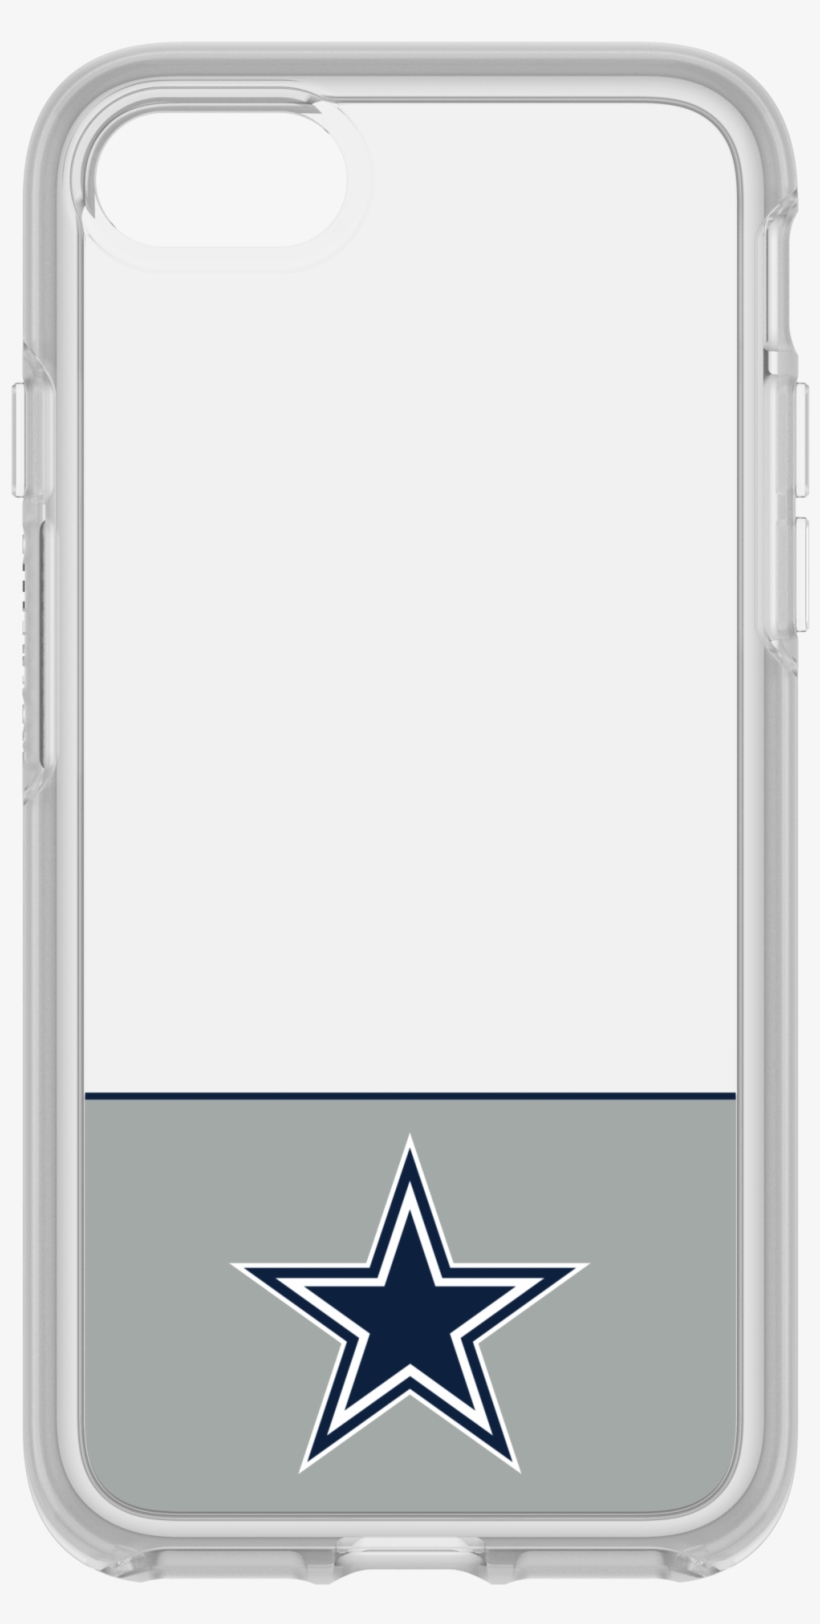 Load Image Into Gallery Viewer, Otterbox Clear Symmetry - Mobile Phone, transparent png #9738876